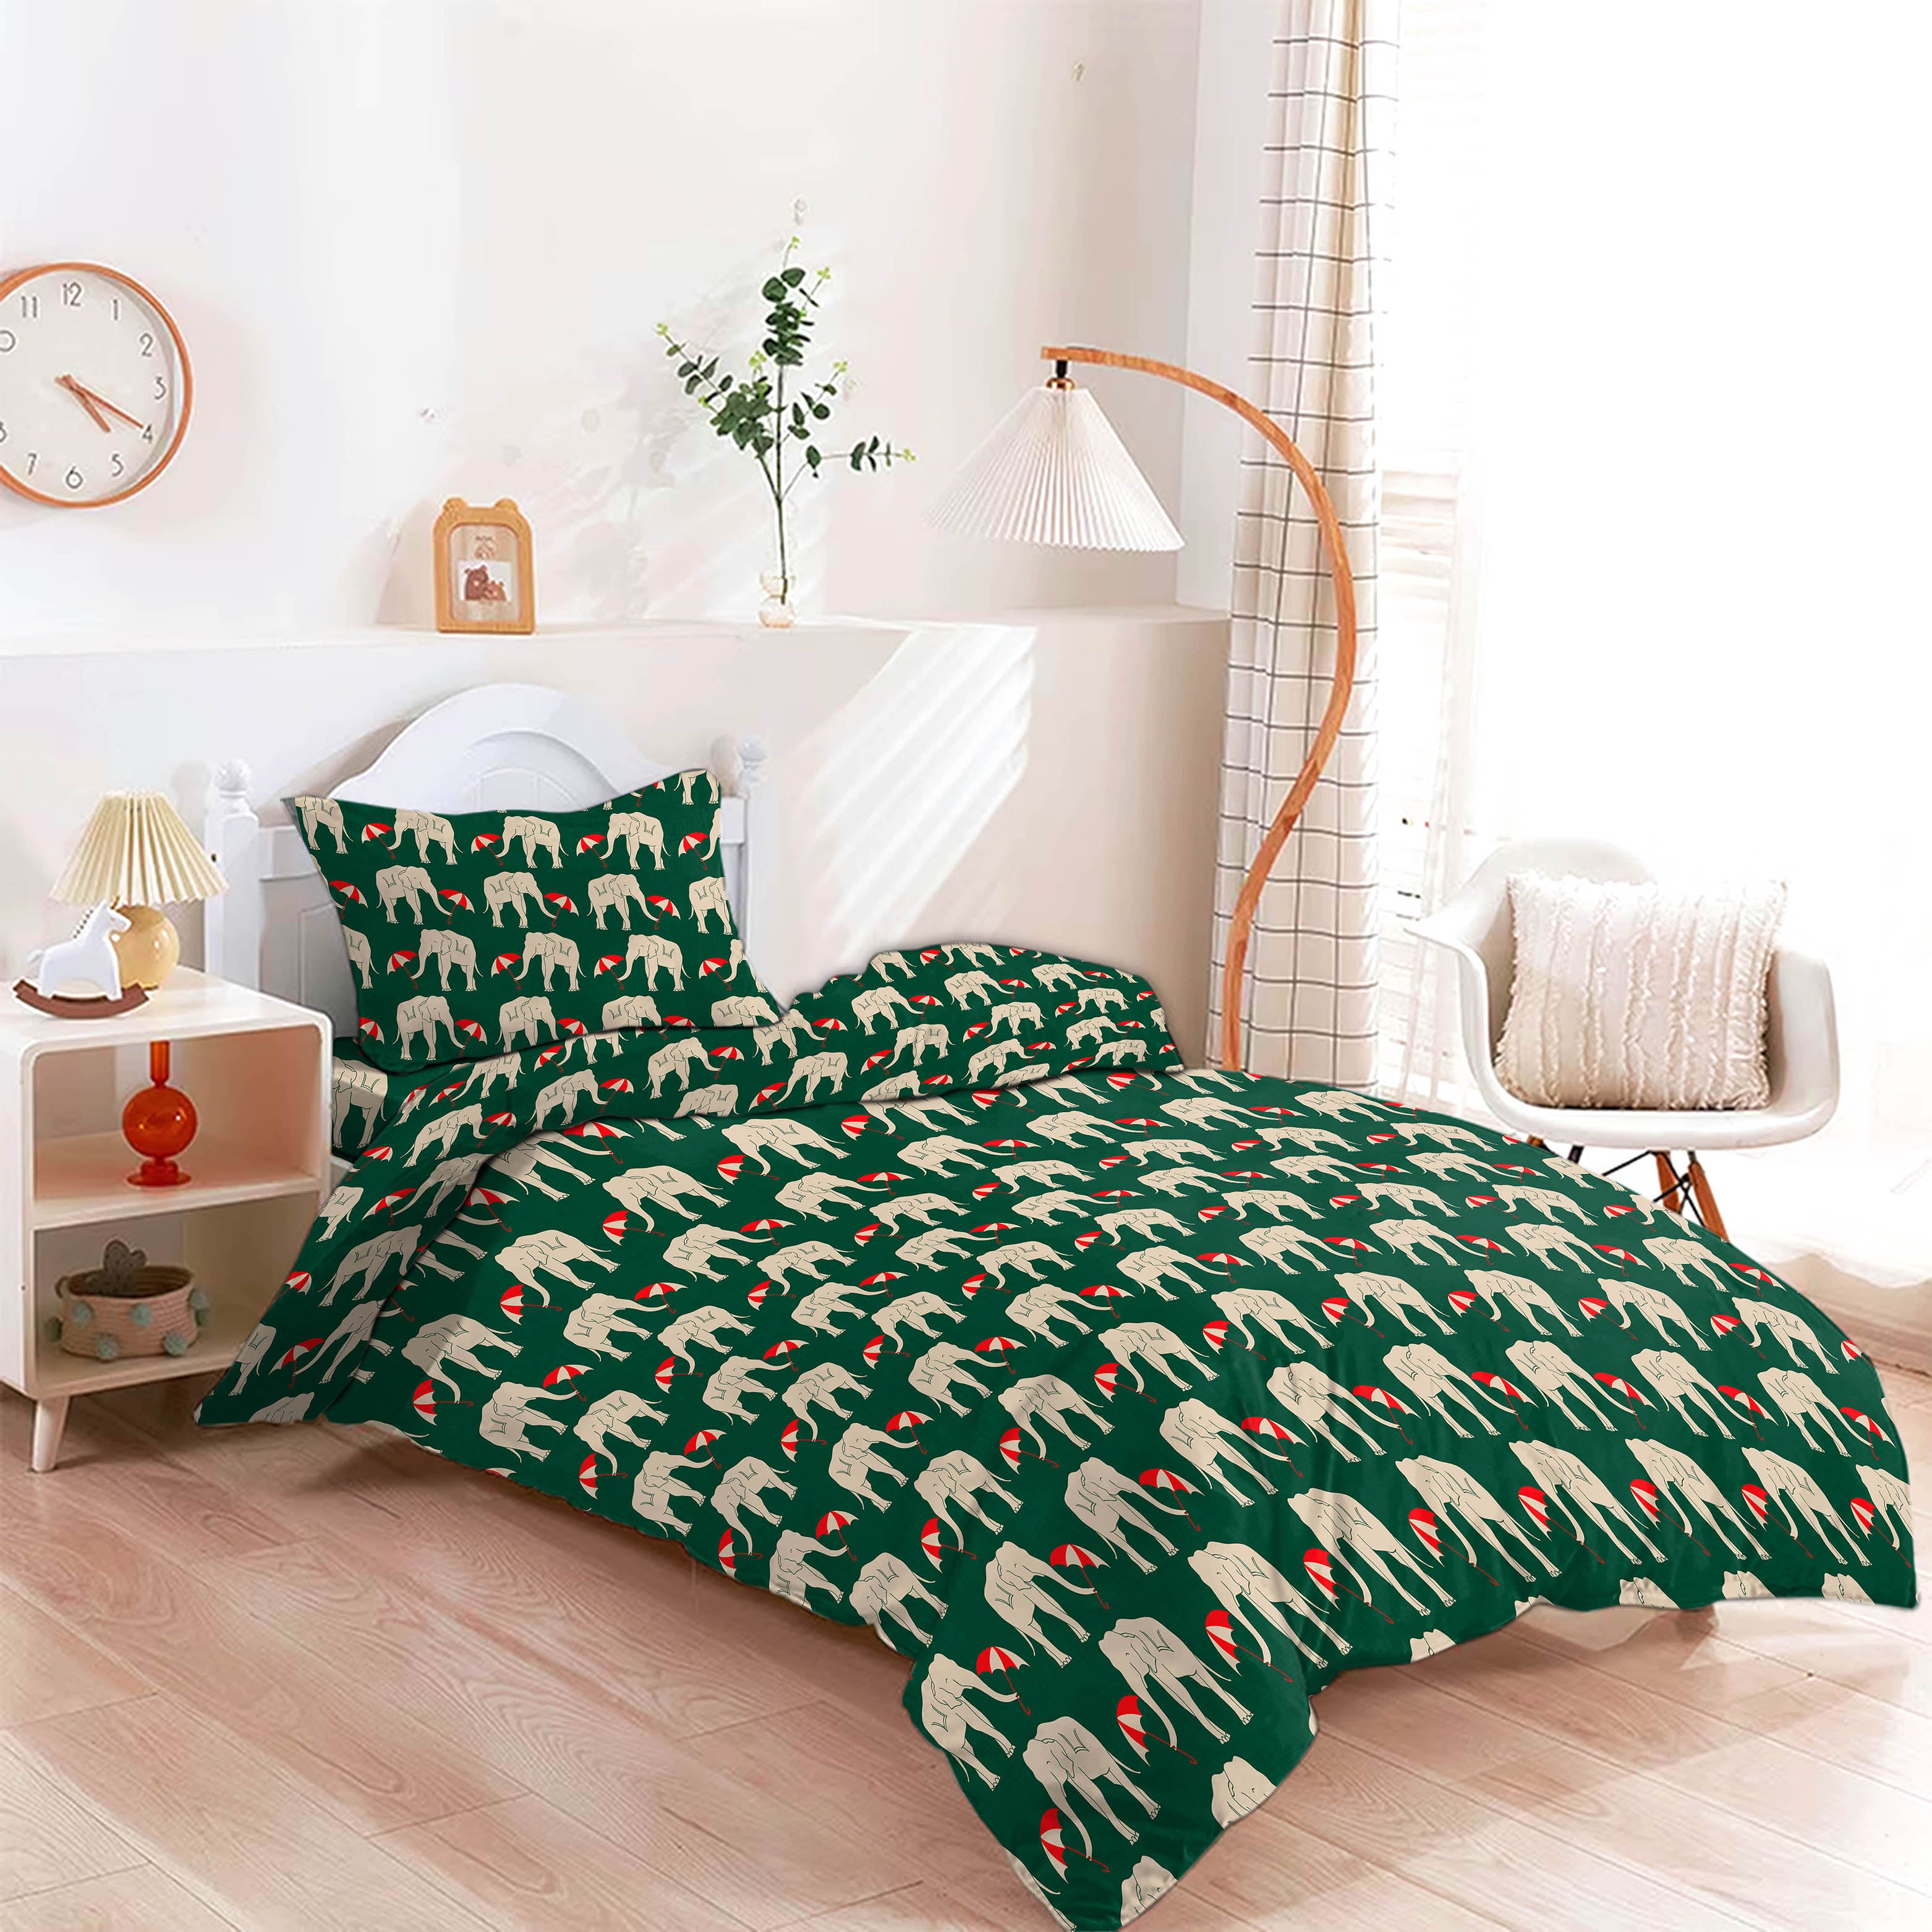 ELEPHANT EVERGREEN BEDCOVER FOR SINGLE BED WITH 2 PILLOW COVERS KING SIZE (60" X 90")